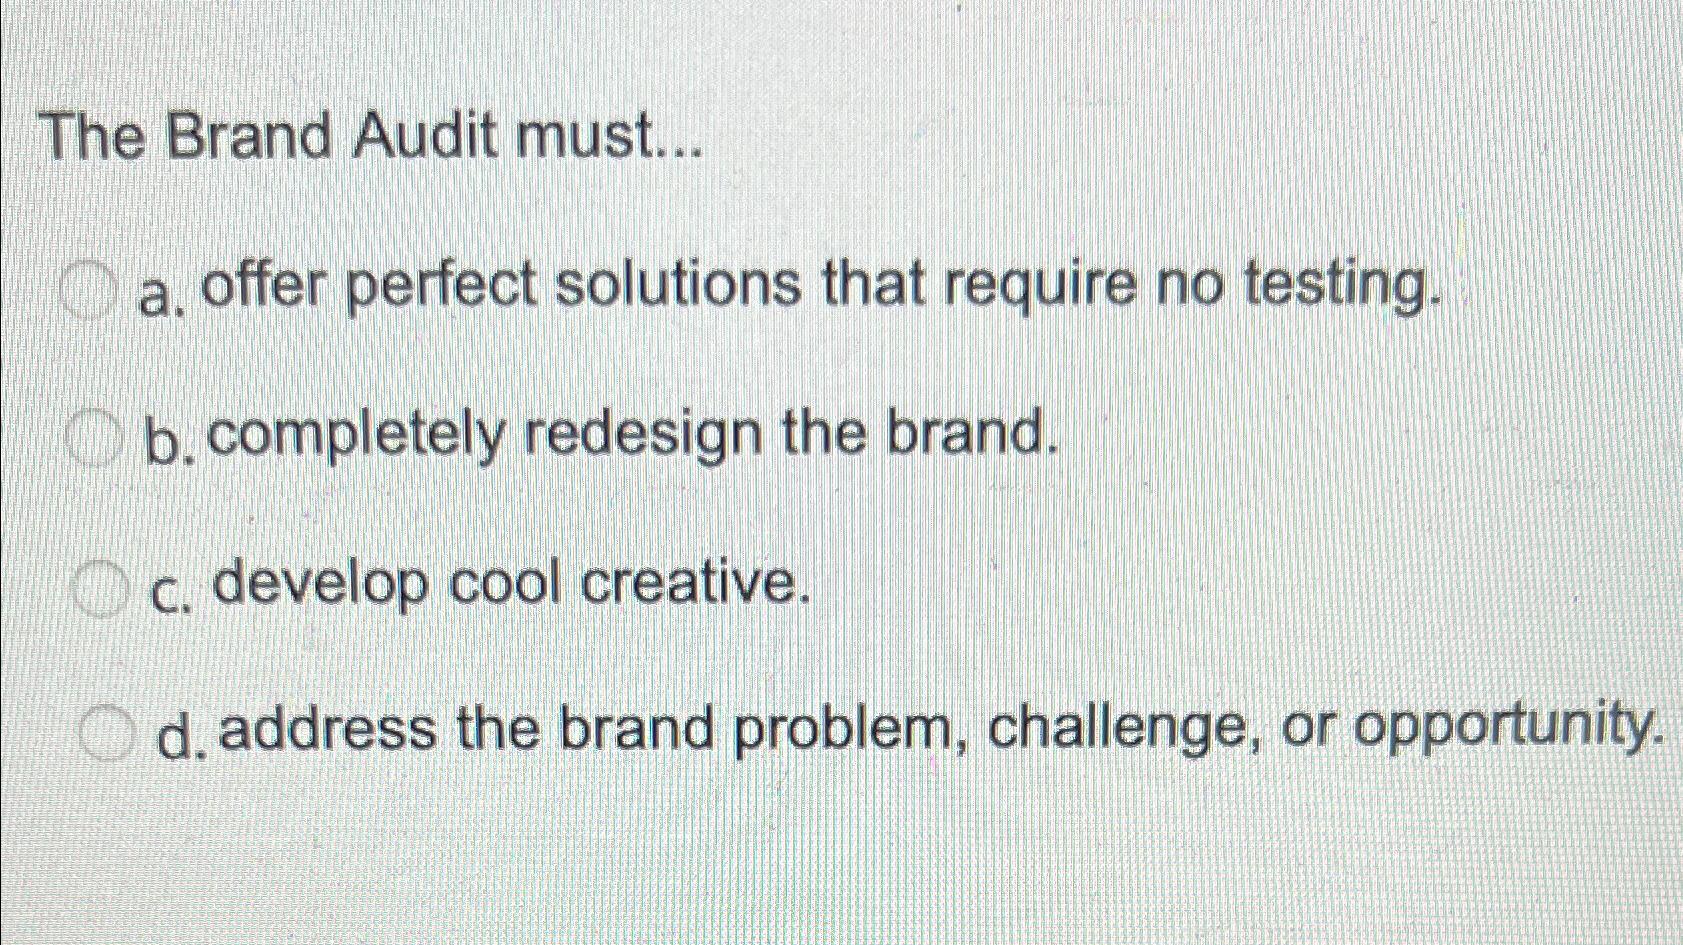 The Brand Audit must... a. offer perfect solutions that require no testing. b. completely redesign the brand.